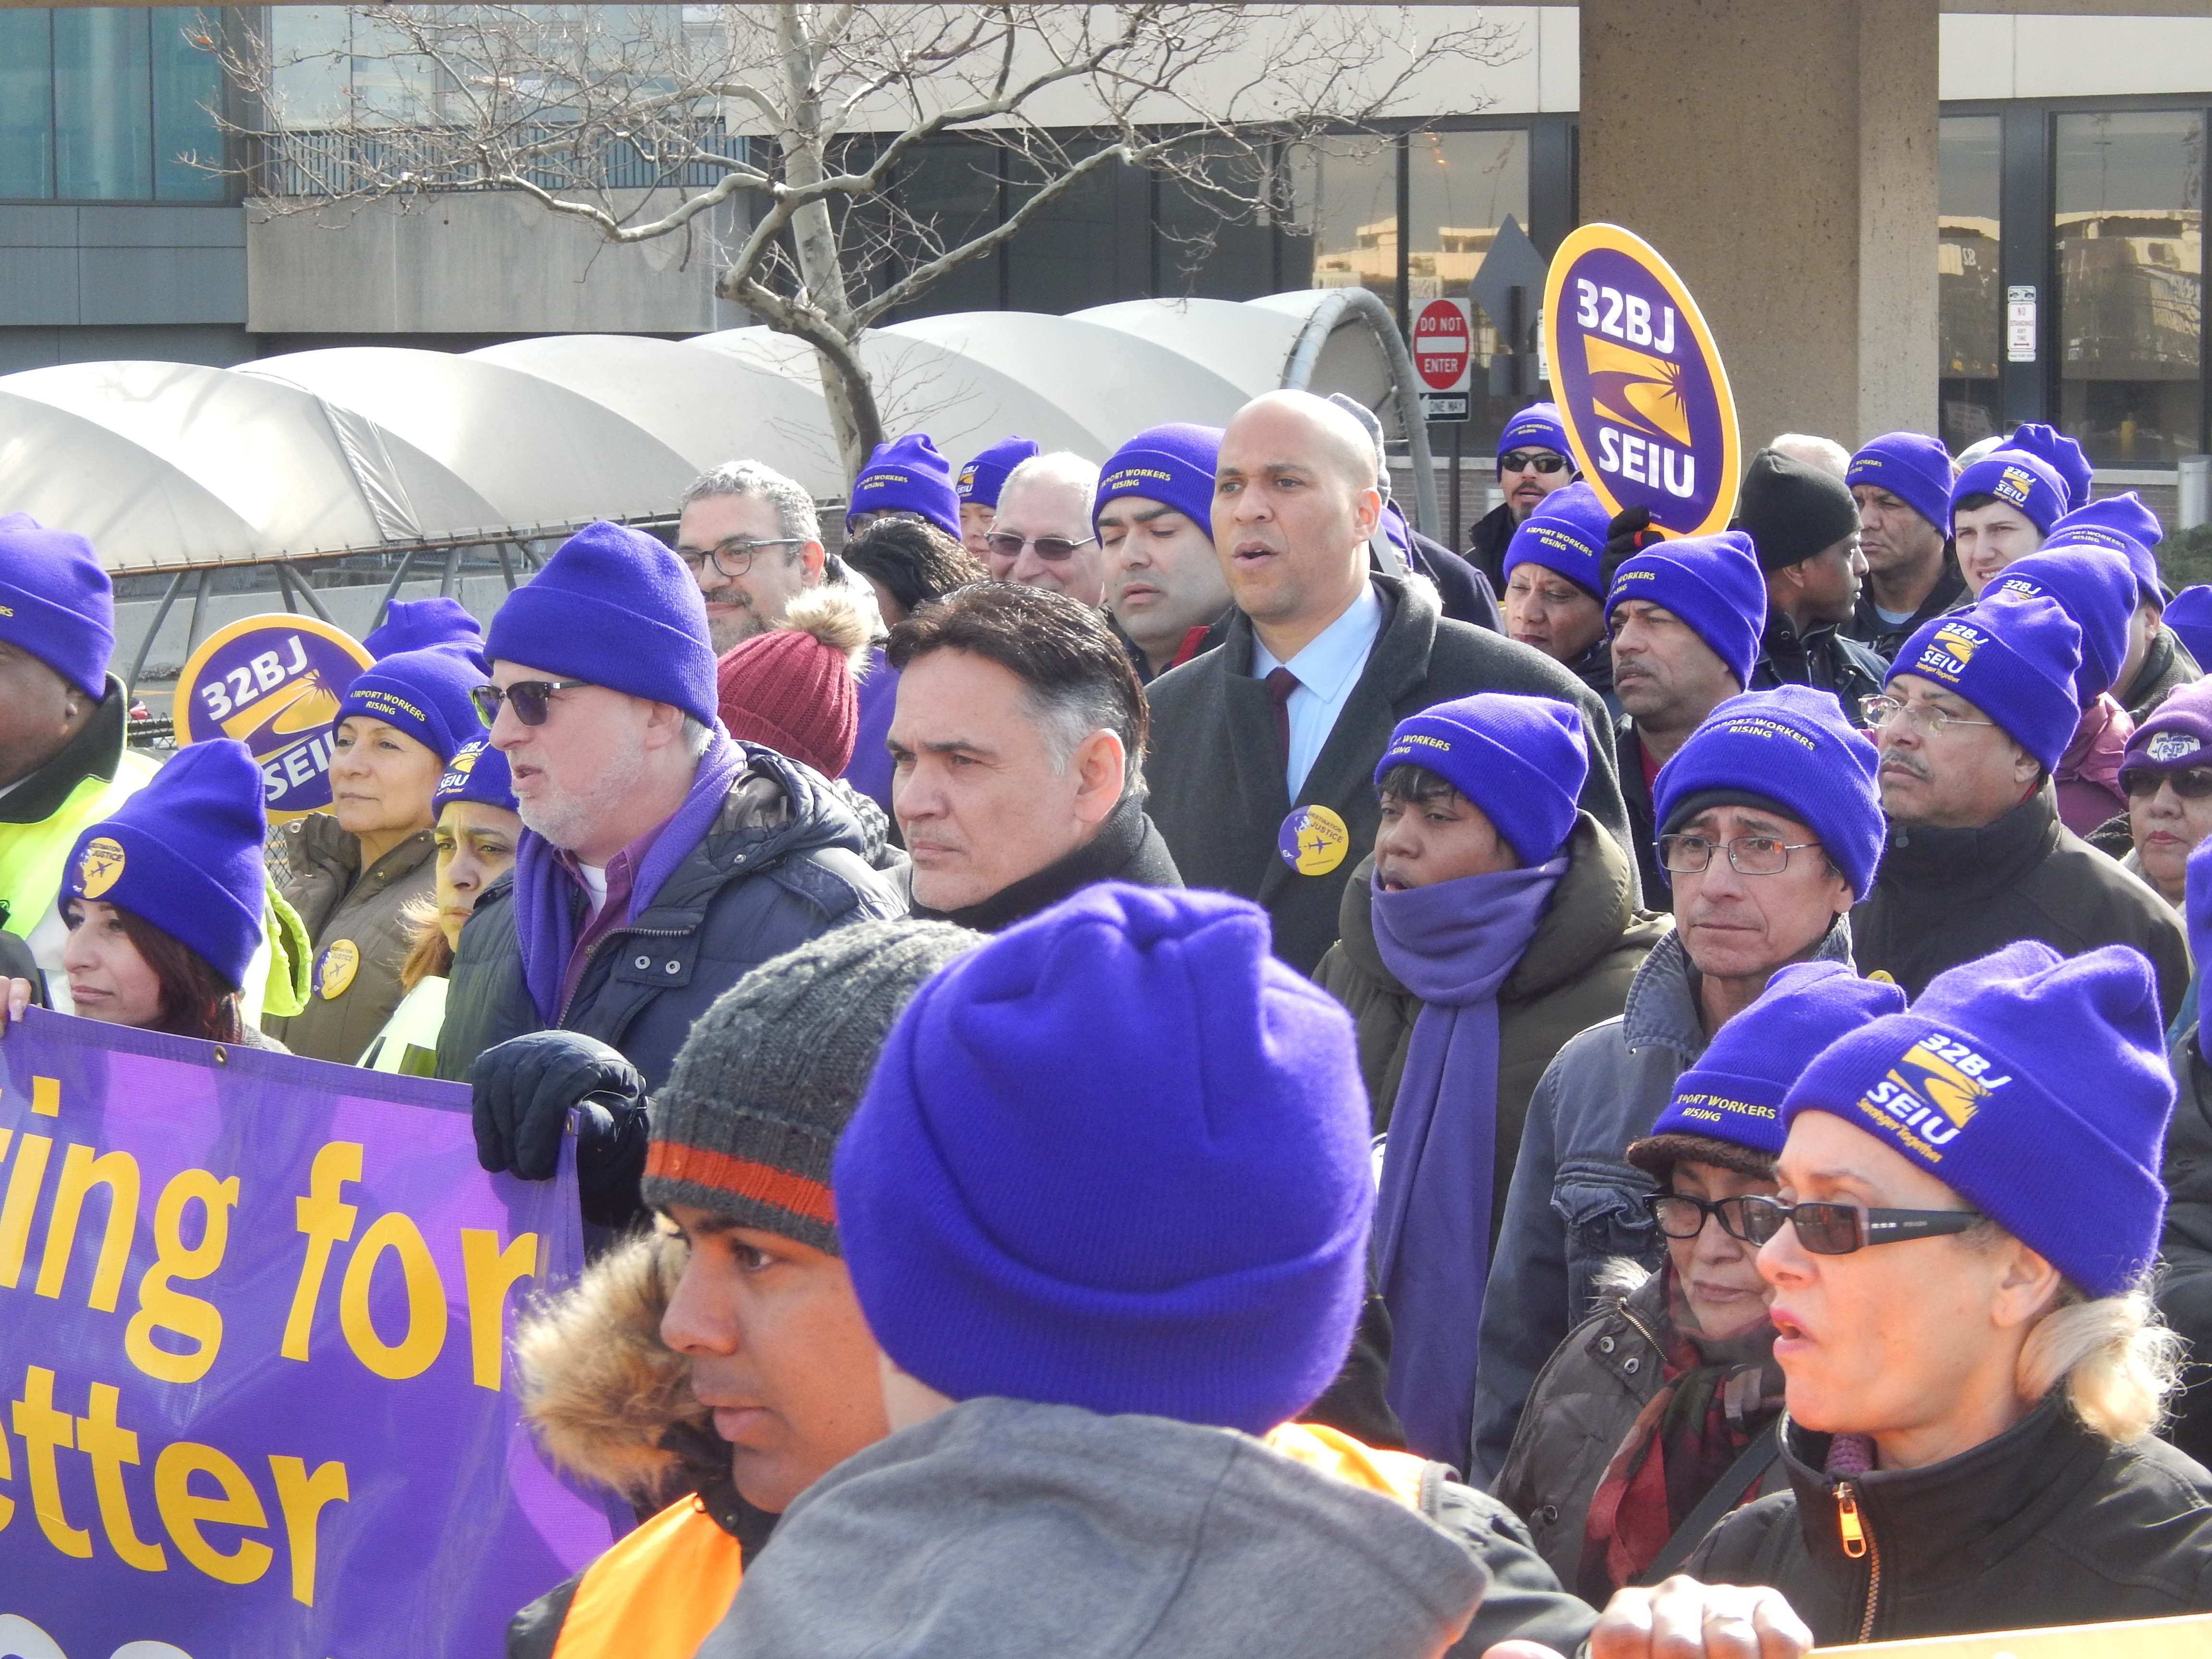 Inspired by MLK, 32BJ SEIU Workers, Lawmakers March for ...